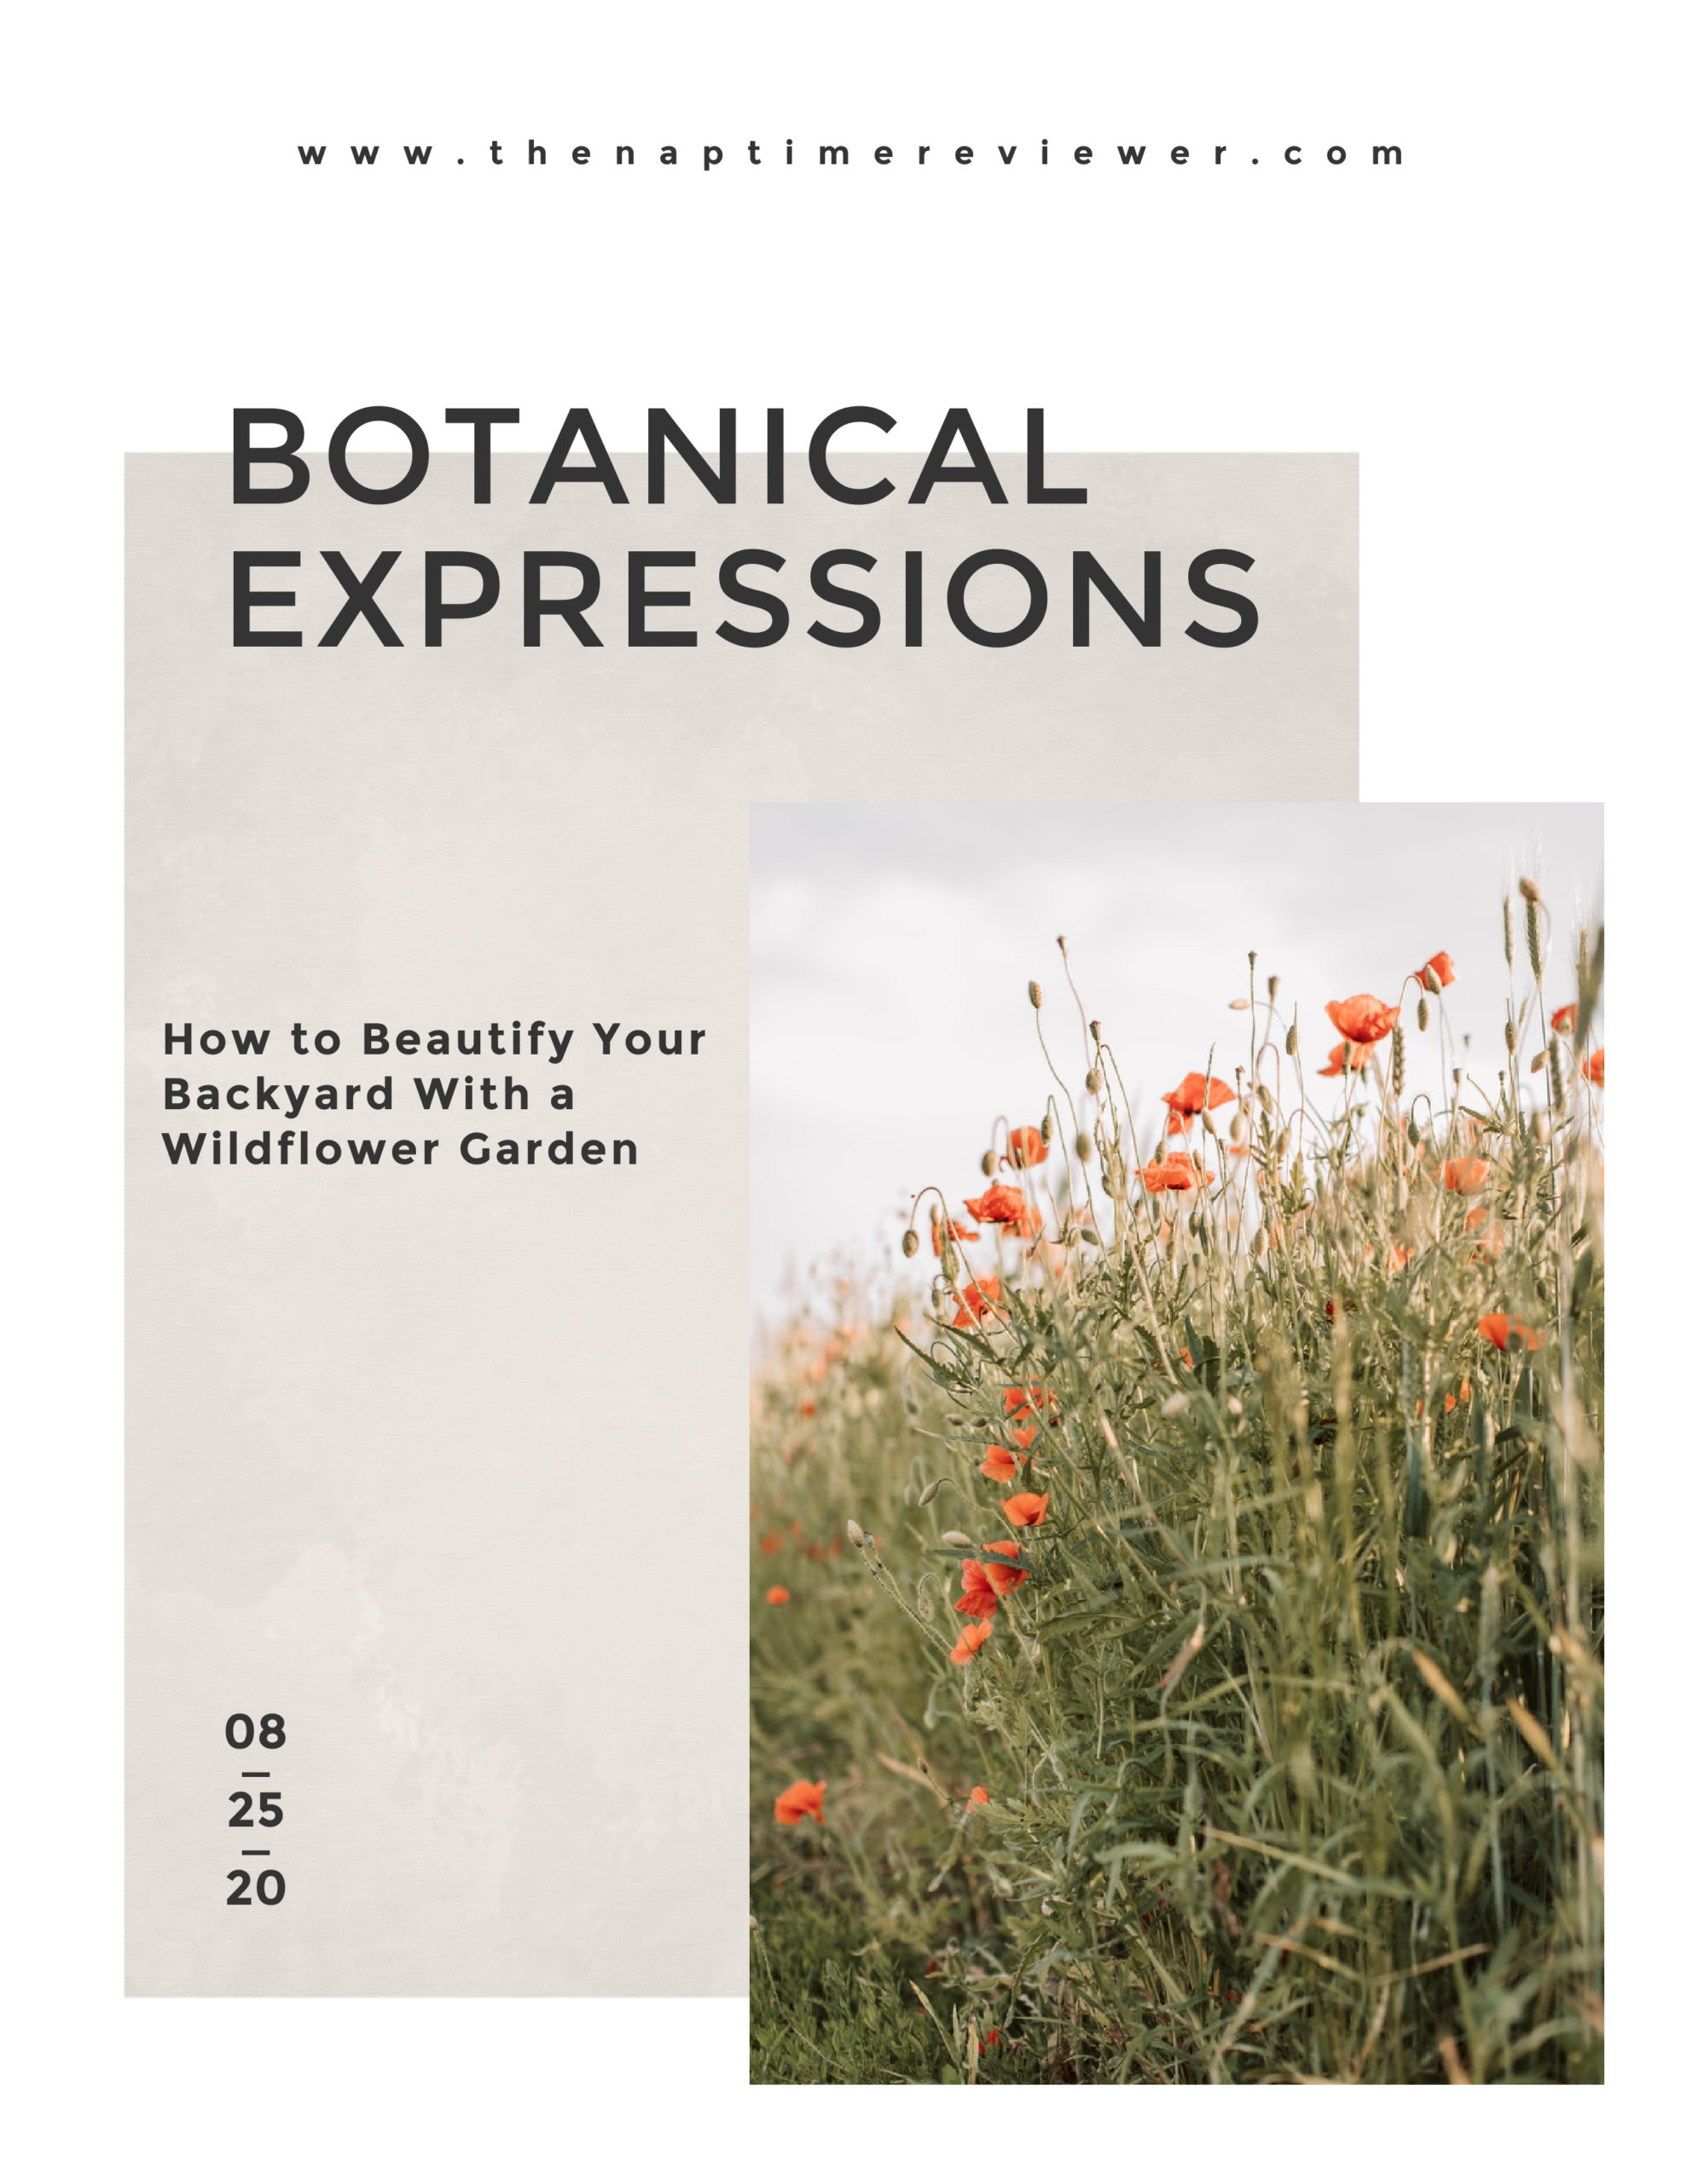 Botanical Expressions - How to Beautify your backyard with a wildflower garden.